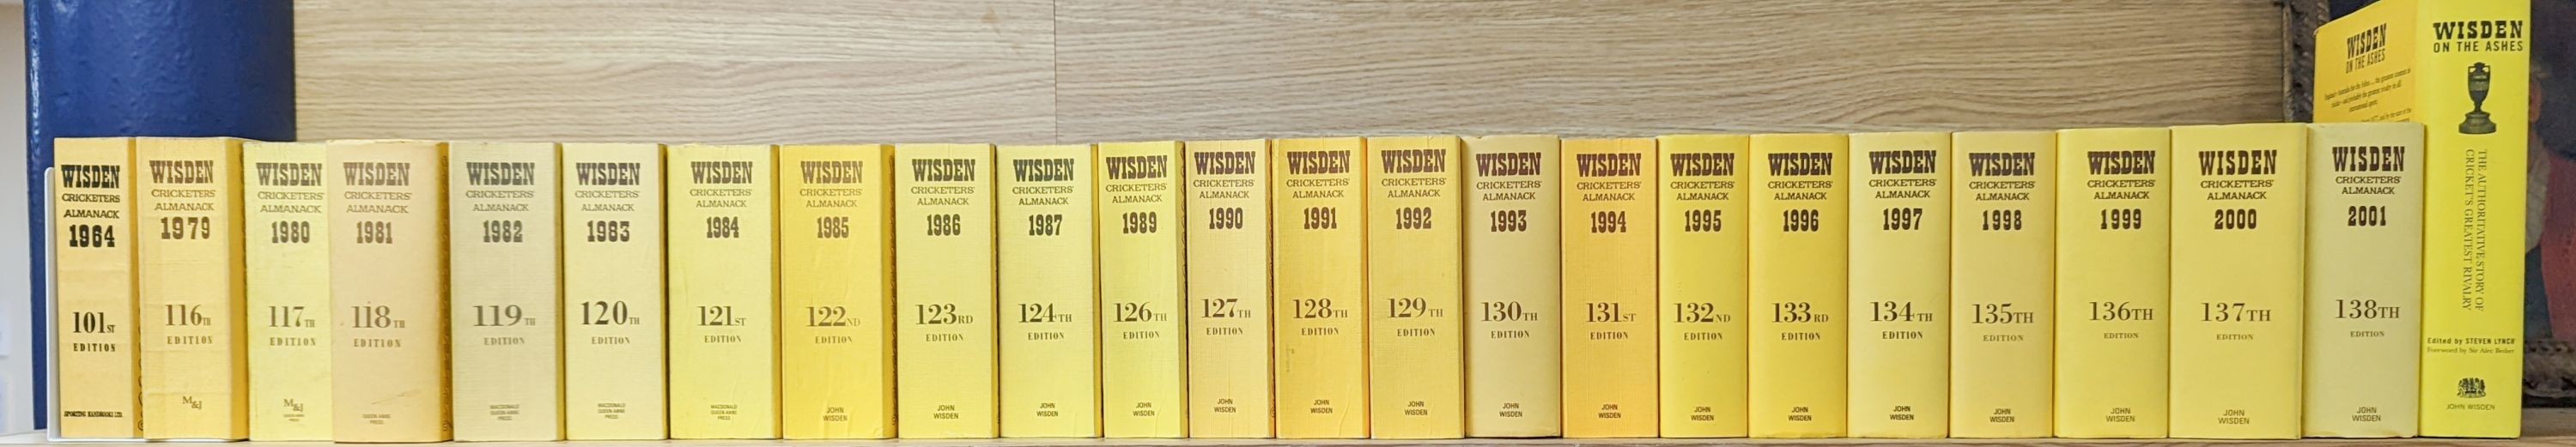 Wisdens Almanack, 73 volumes, 1947-1964, 1966-2020 and one other Wisden edition “On the Ashes”.